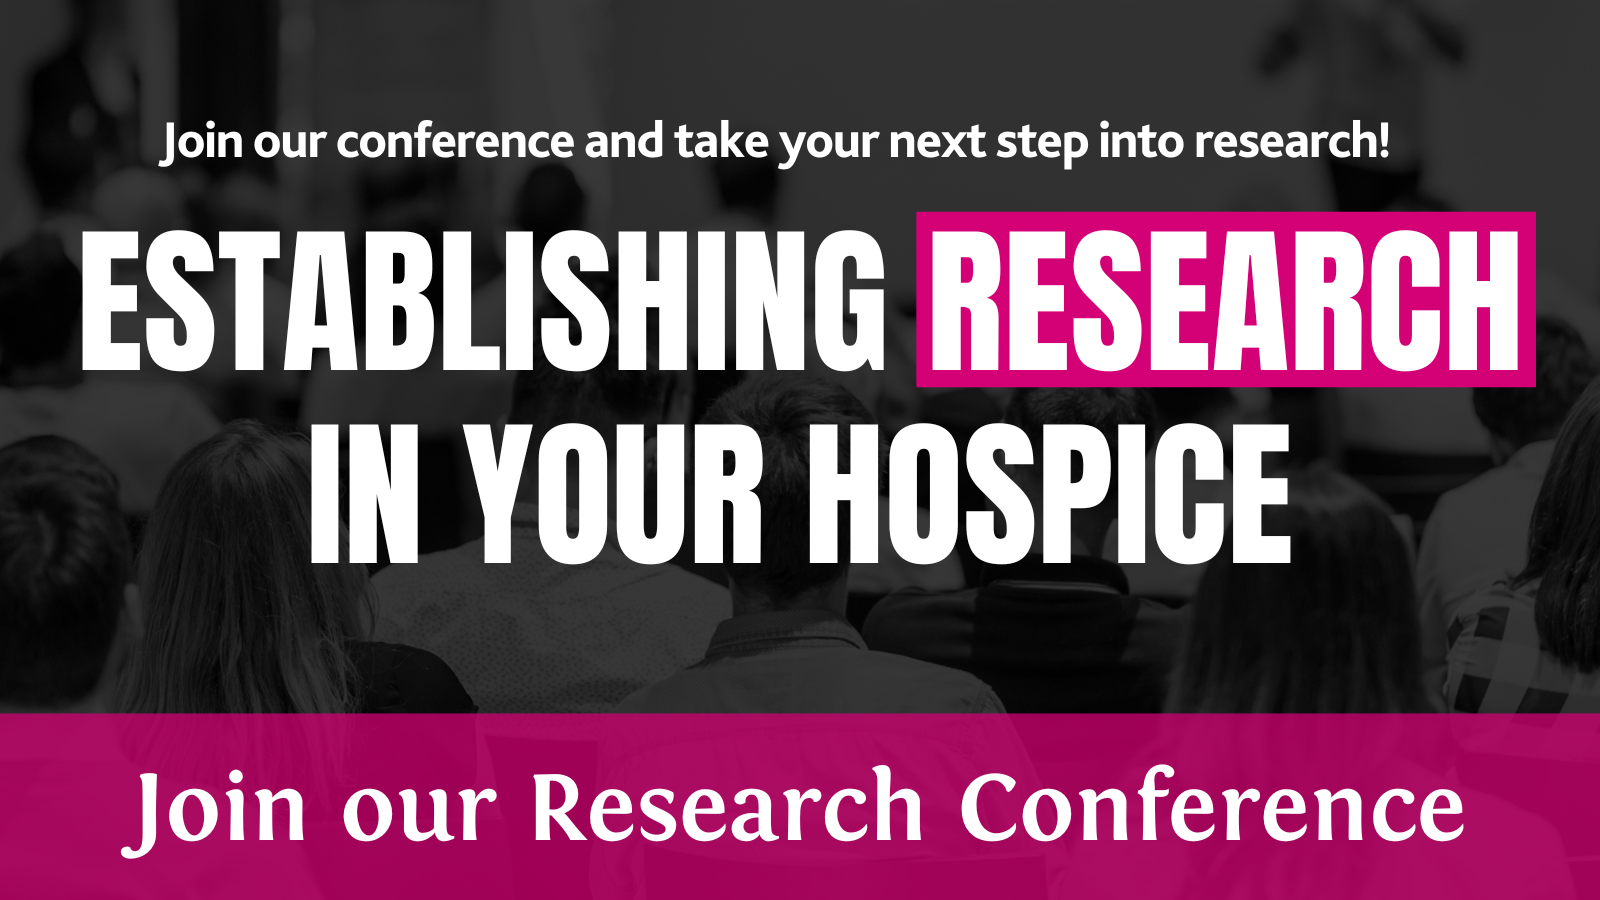 Research conference